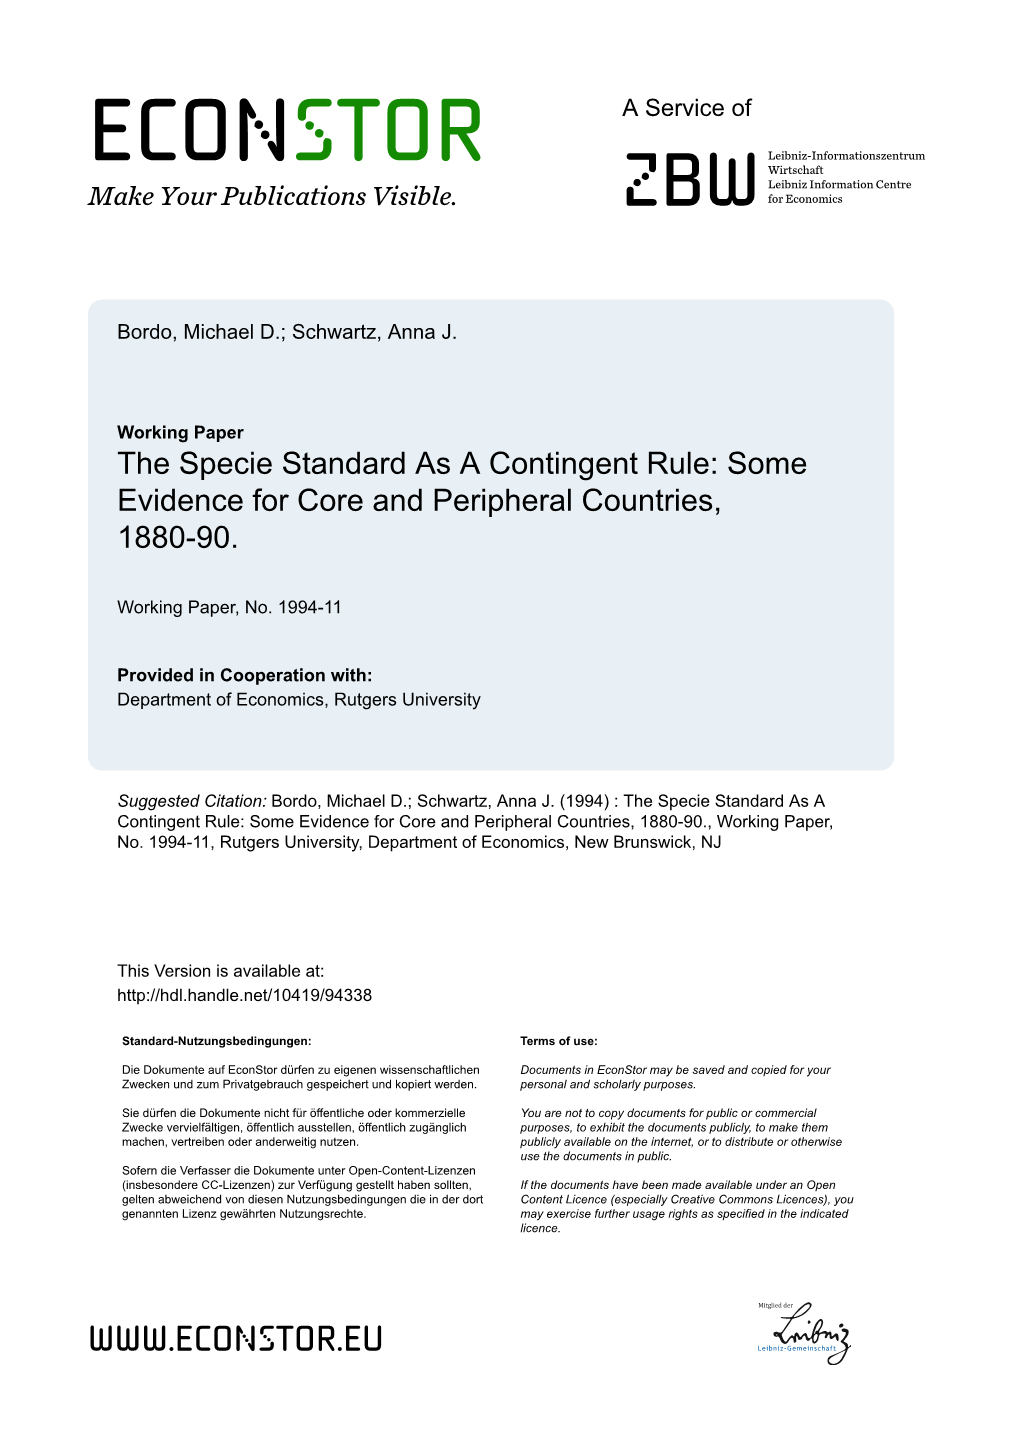 The Specie Standard As a Contingent Rule: Some Evidence for Core and Peripheral Countries, 1880-90